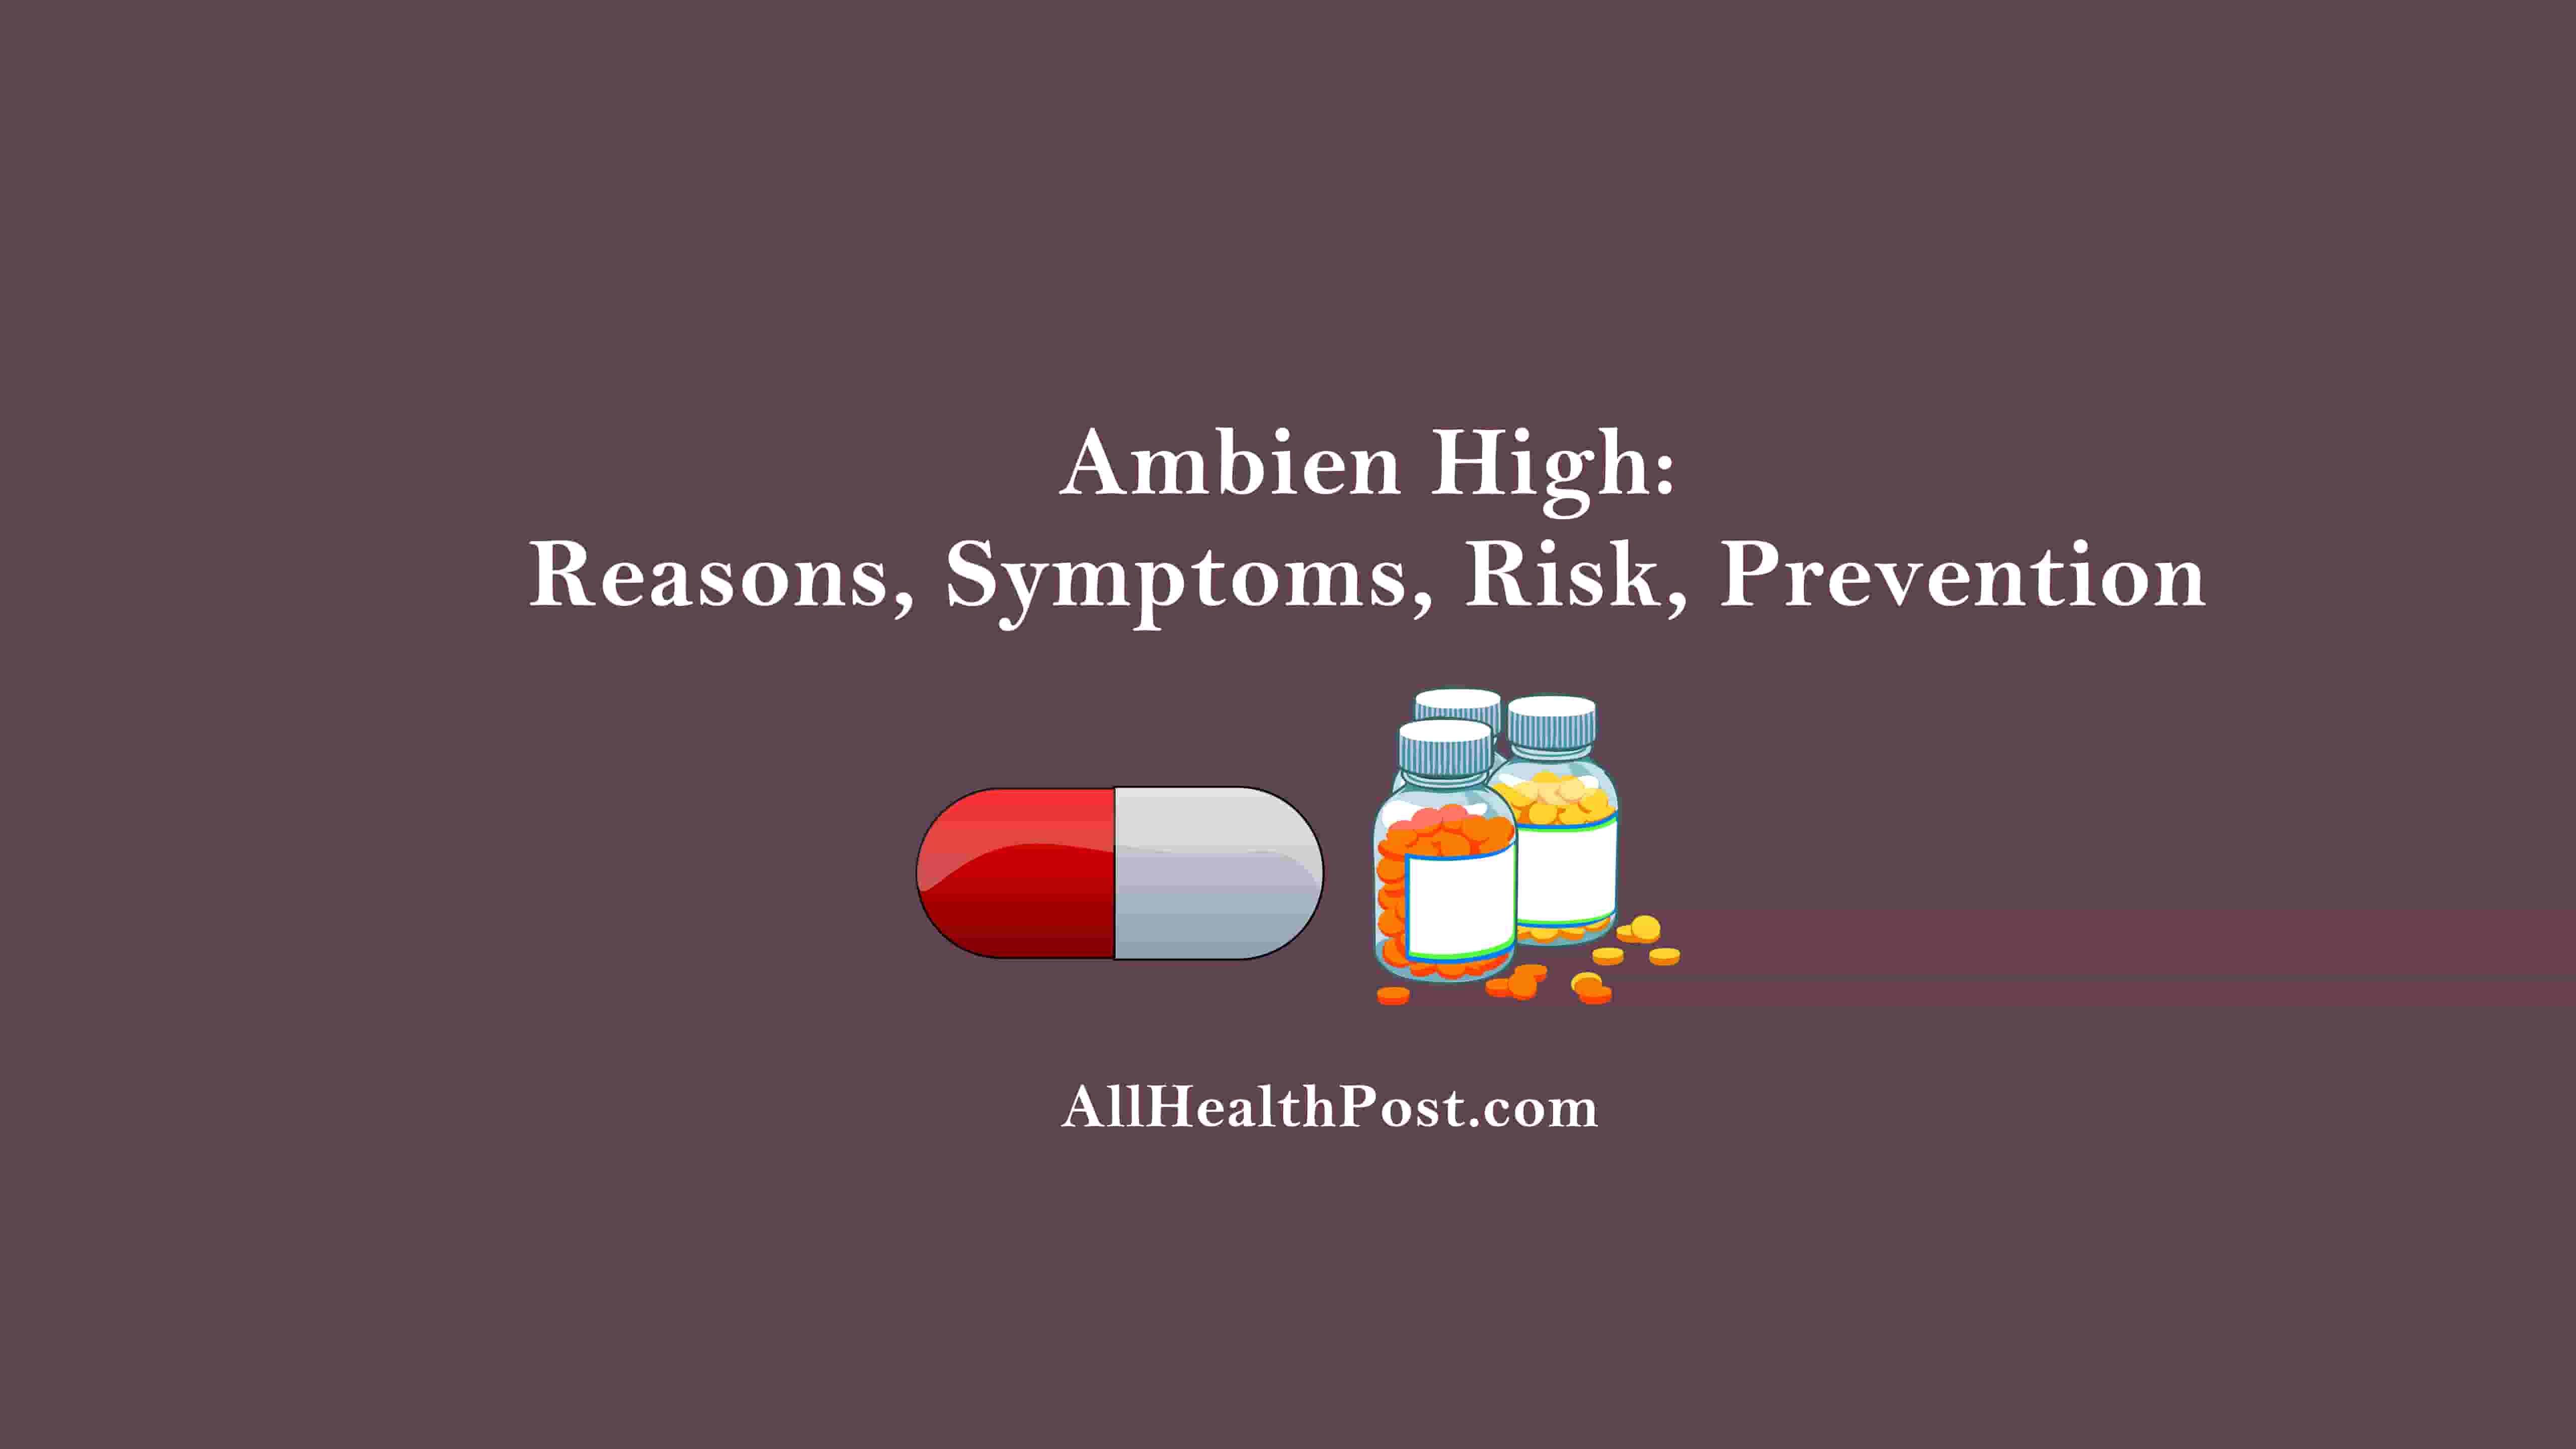 How To Intensify Ambien High